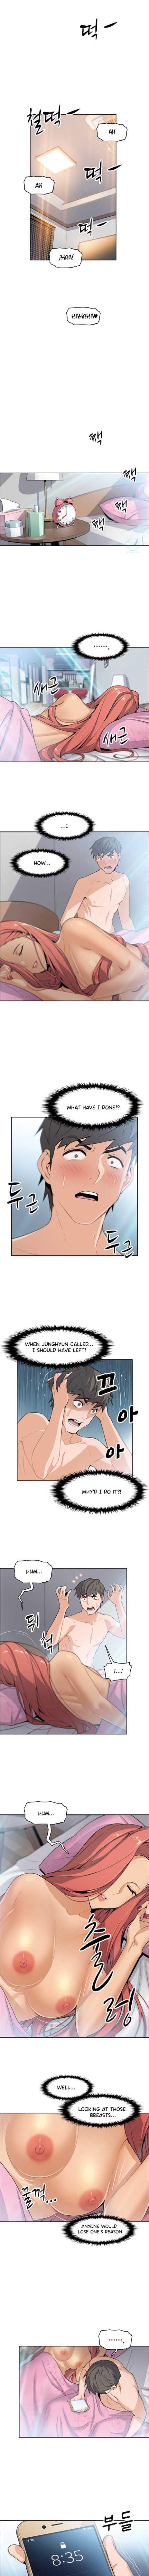 Housekeeper [Neck Pillow, Paper] Ch.49/49 [English] [Manhwa PDF] Completed 22